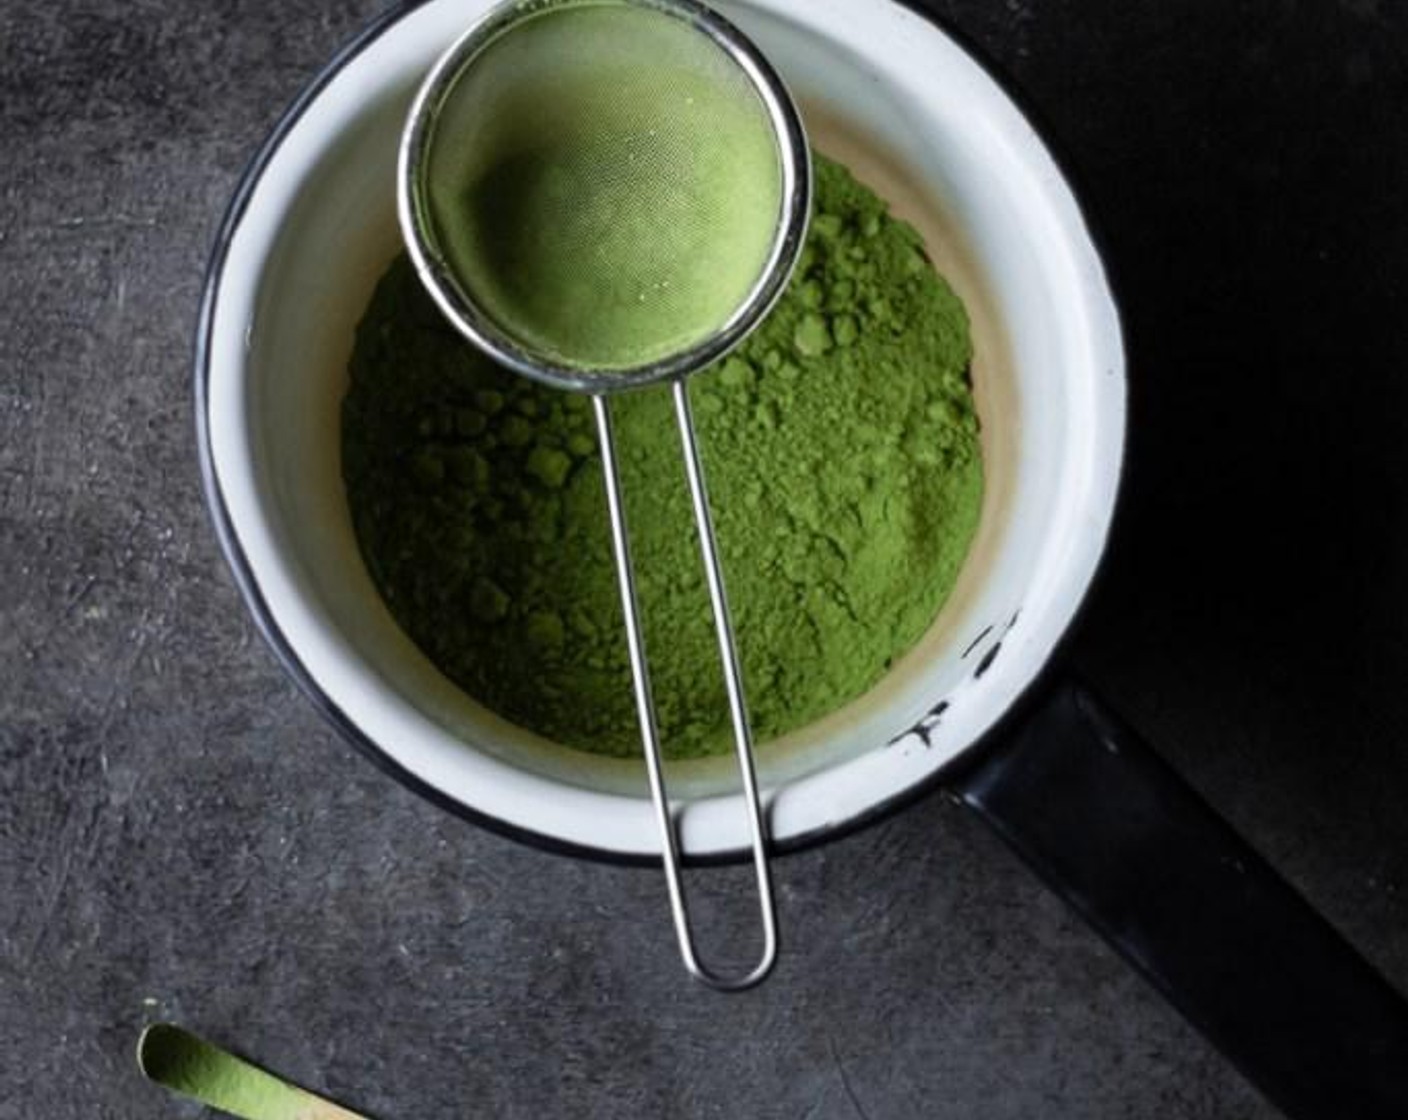 step 1 For the Matcha White Hot Chocolate: Using a fine mesh sifter, sift Matcha Powder (1 Tbsp) into a saucepan. Add Water (8 fl oz) to saucepan and whisk matcha with hot water until very smooth and no lumps remain.